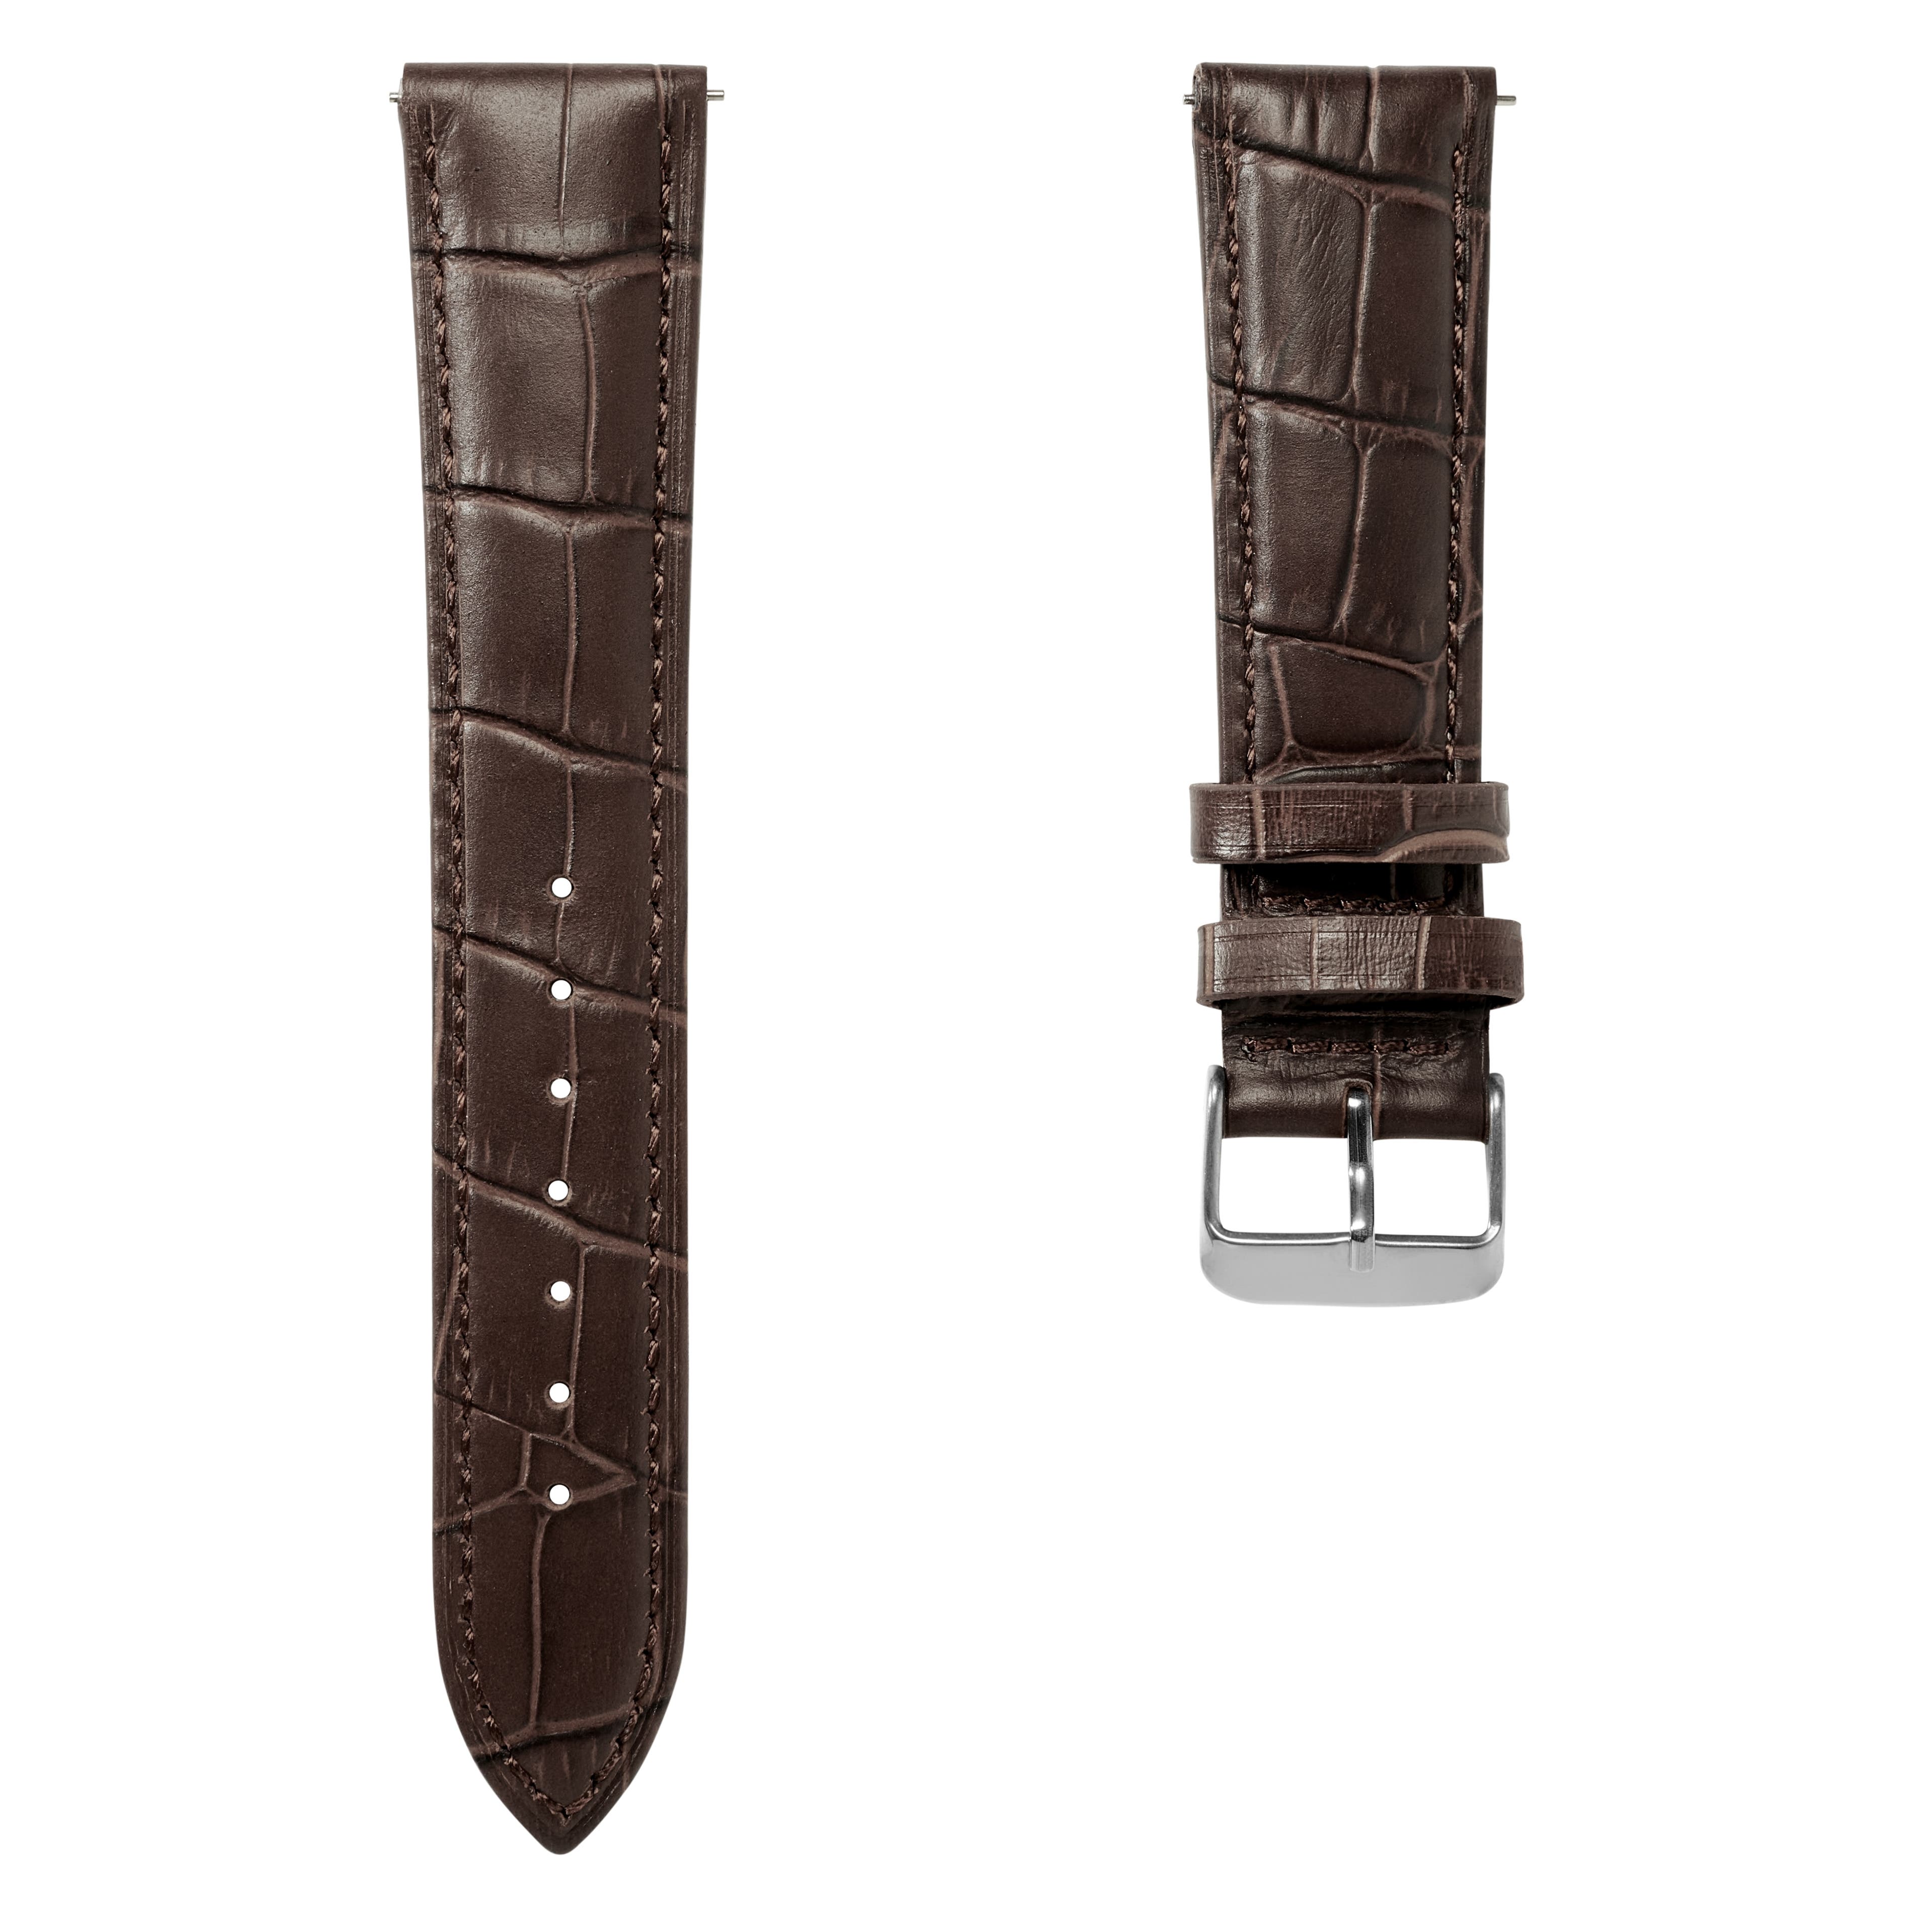 20 mm Crocodile-Embossed Dark-Brown Leather Watch Strap with Silver-Tone Buckle – Quick Release